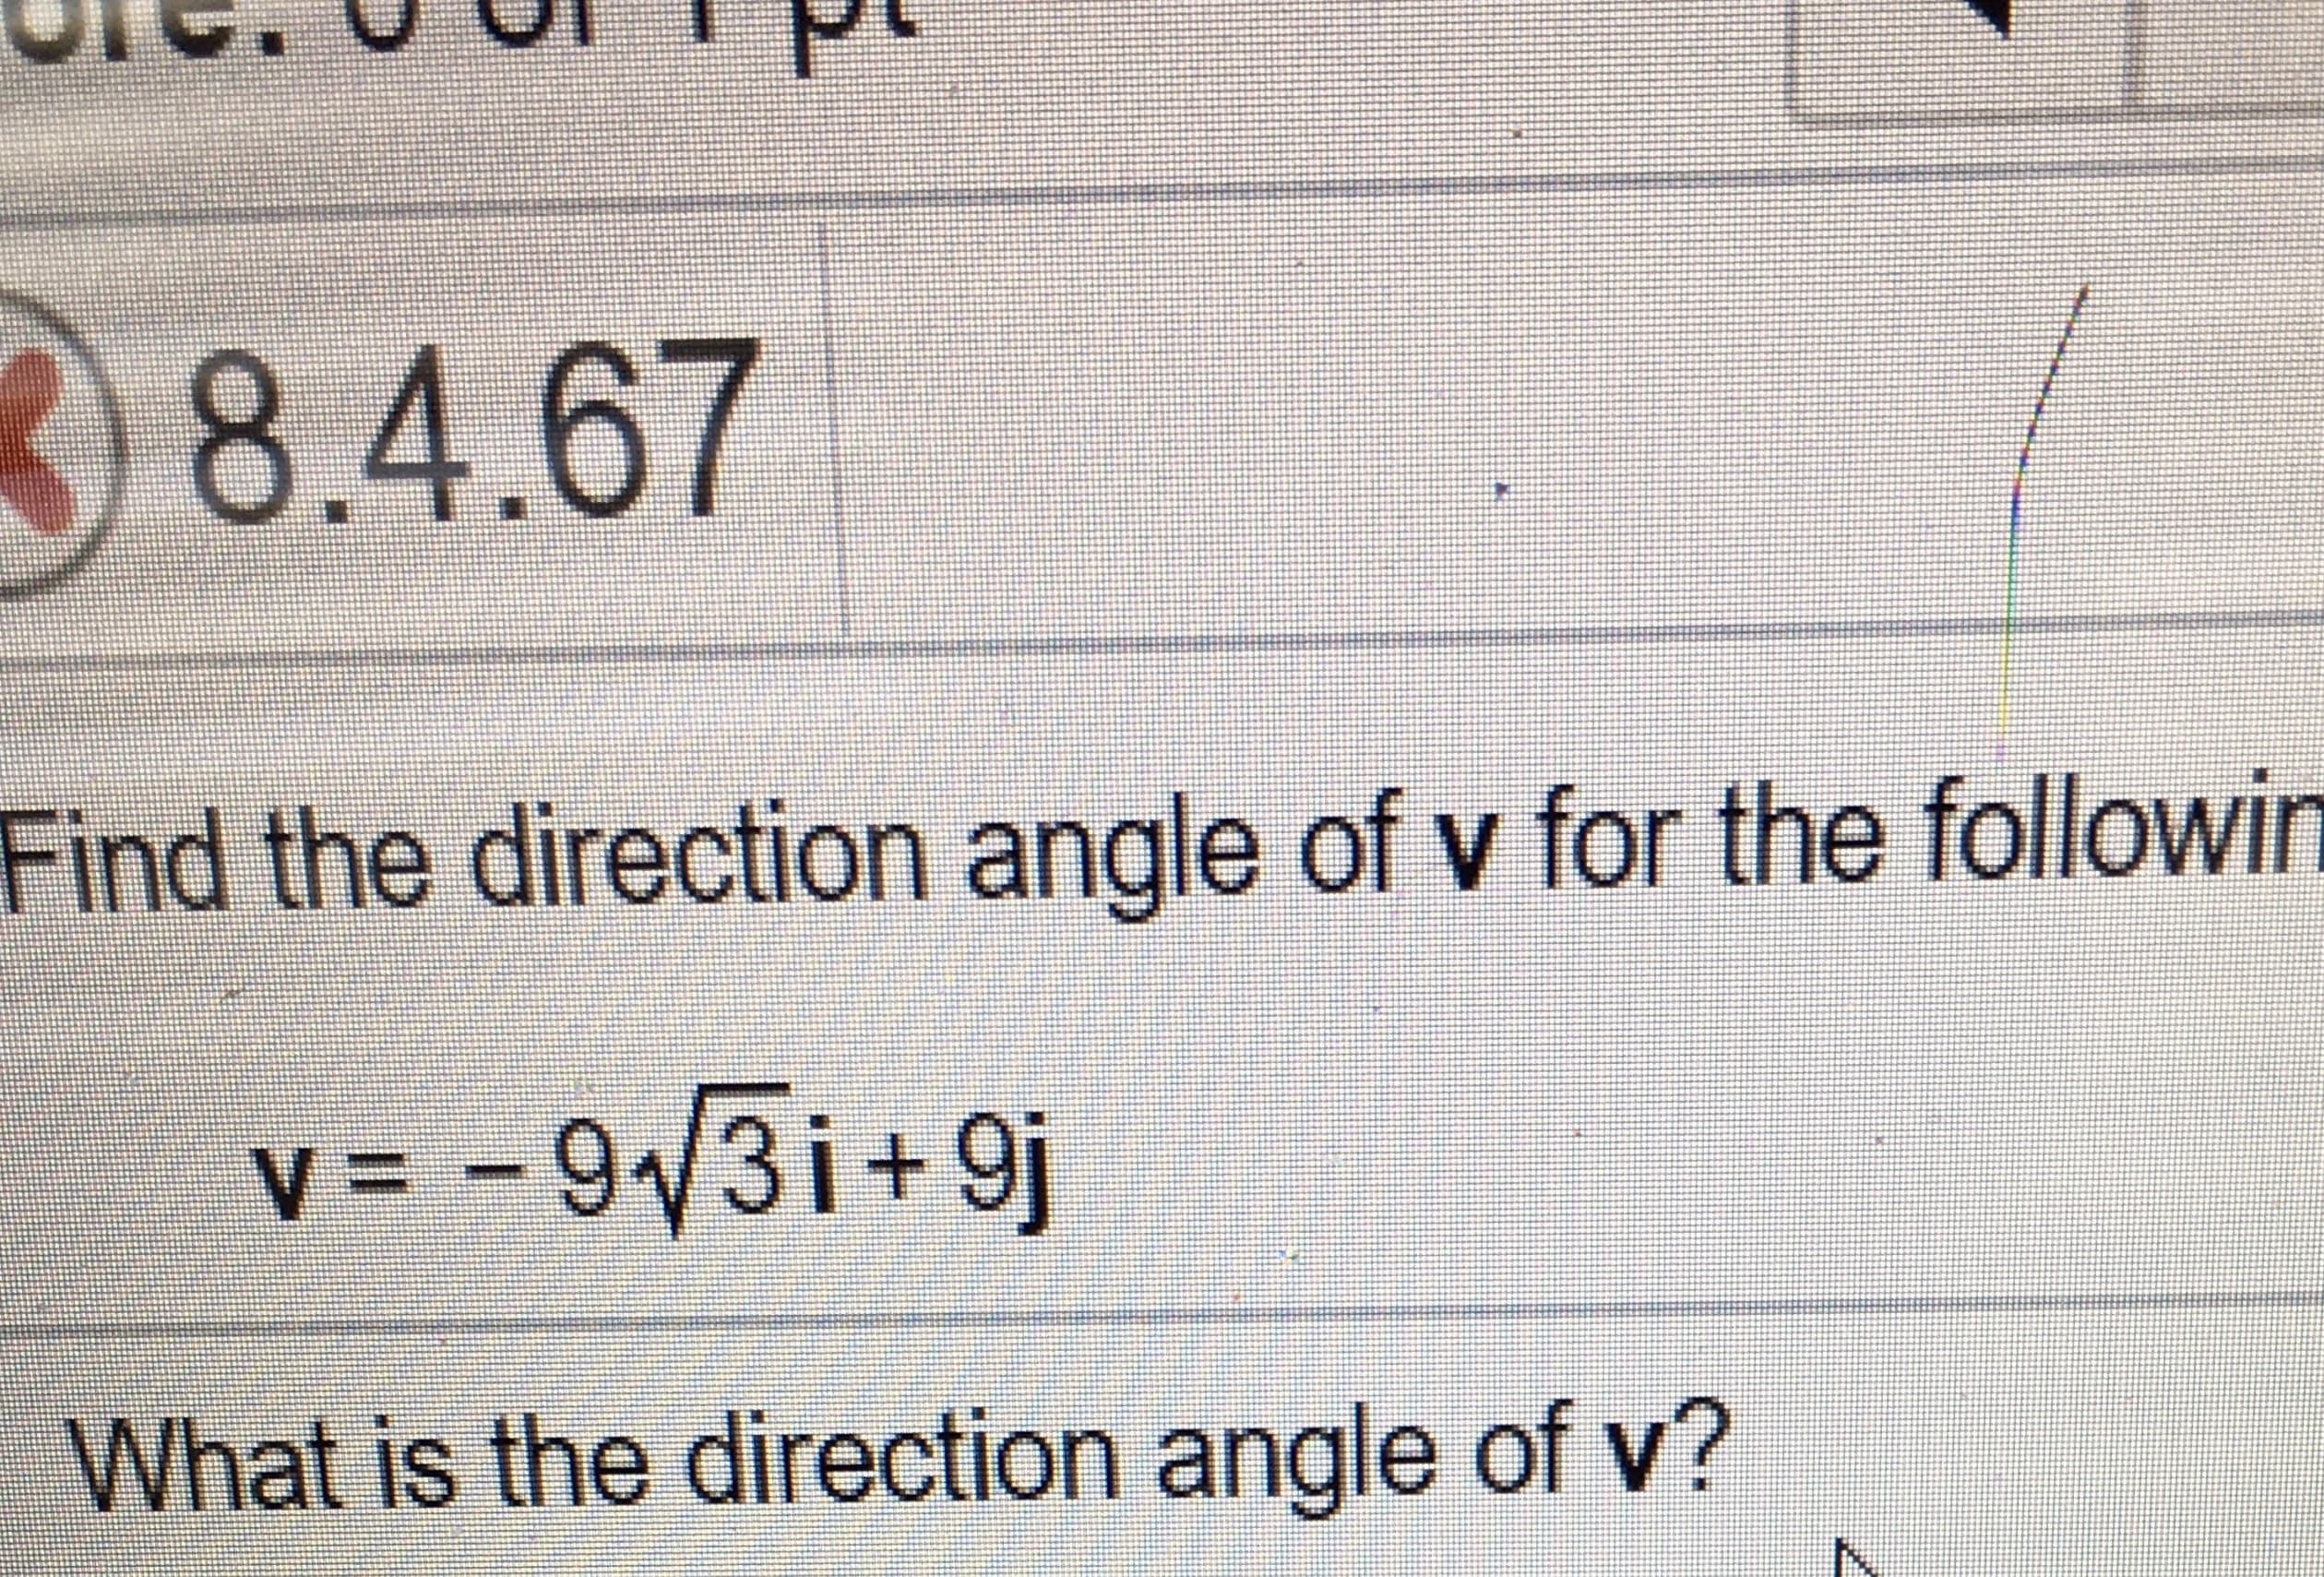 Find the direction angle of v for the followin
v = -9/3i+9j
